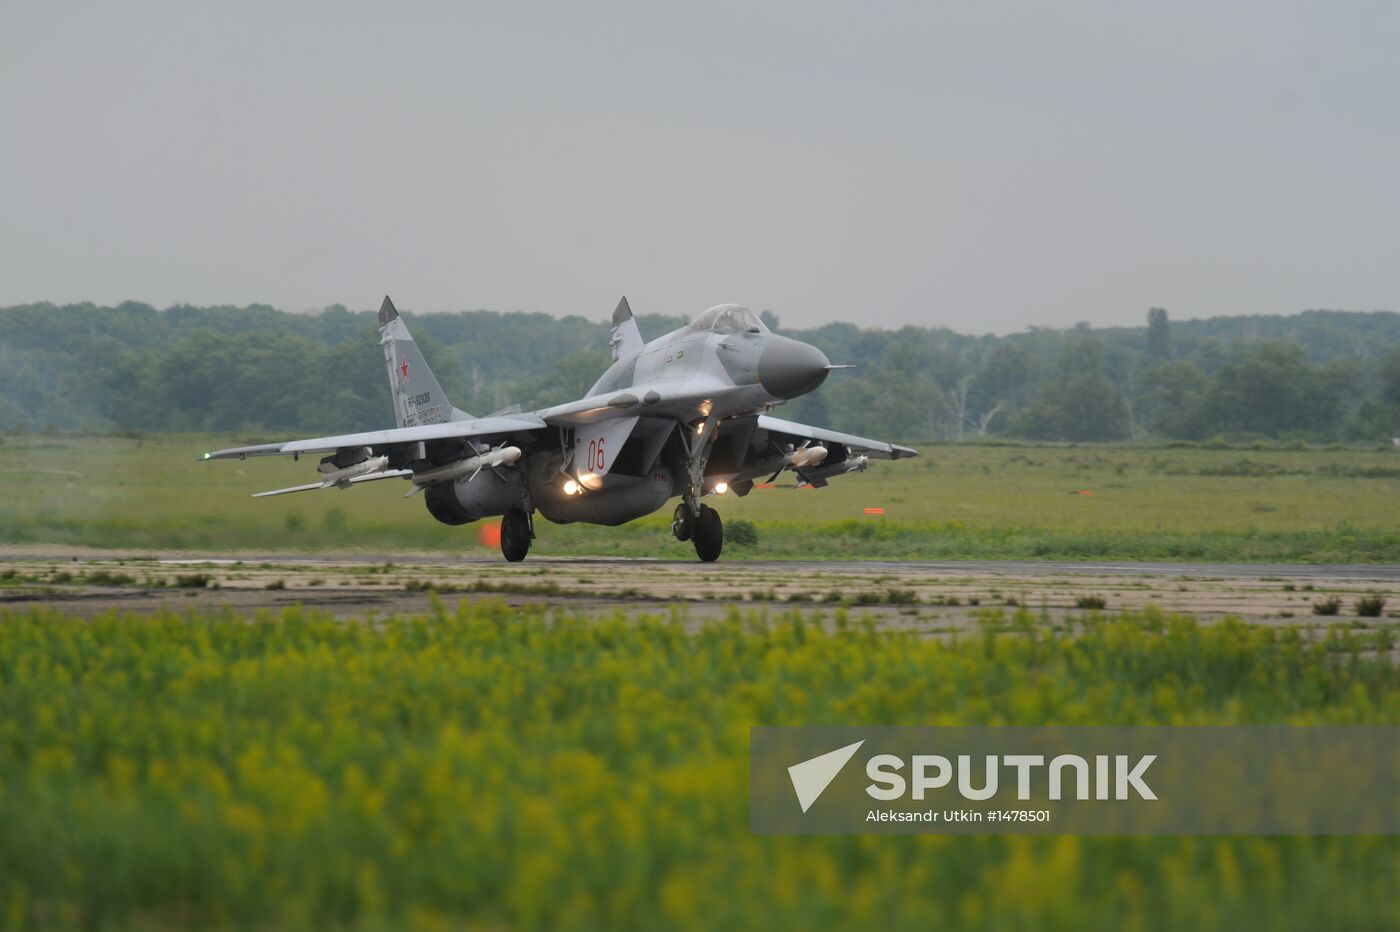 Exercises testing combat readiness of ZVO aircraft